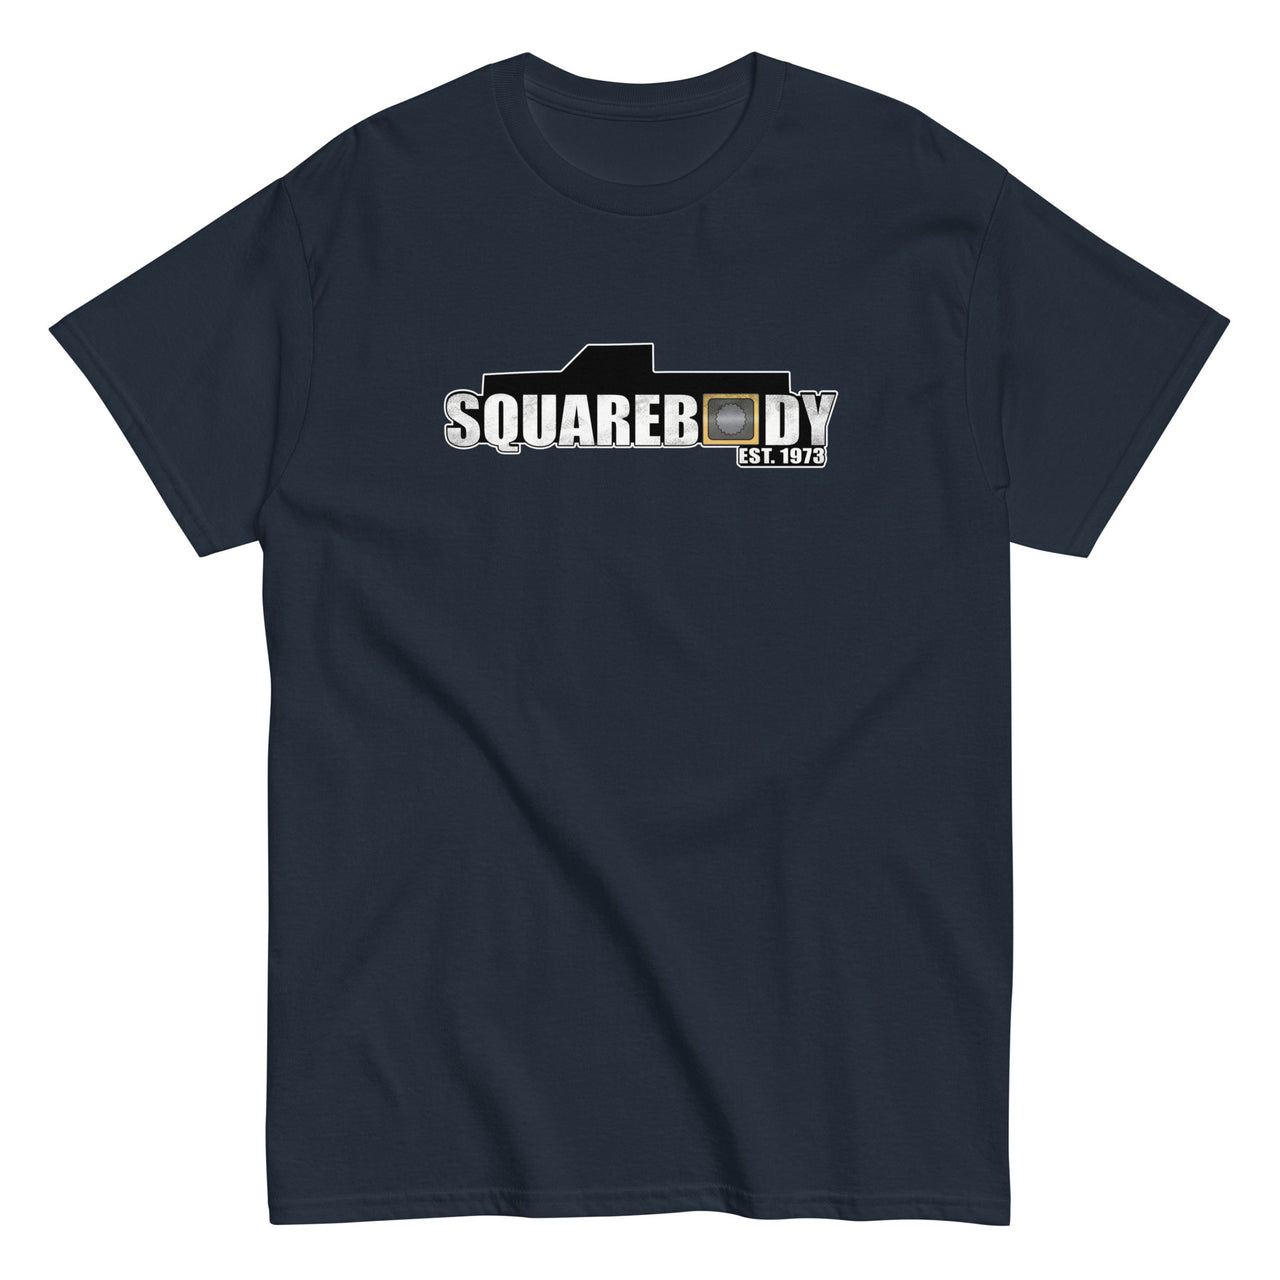 Square Body Est 1973 T-Shirt in navy